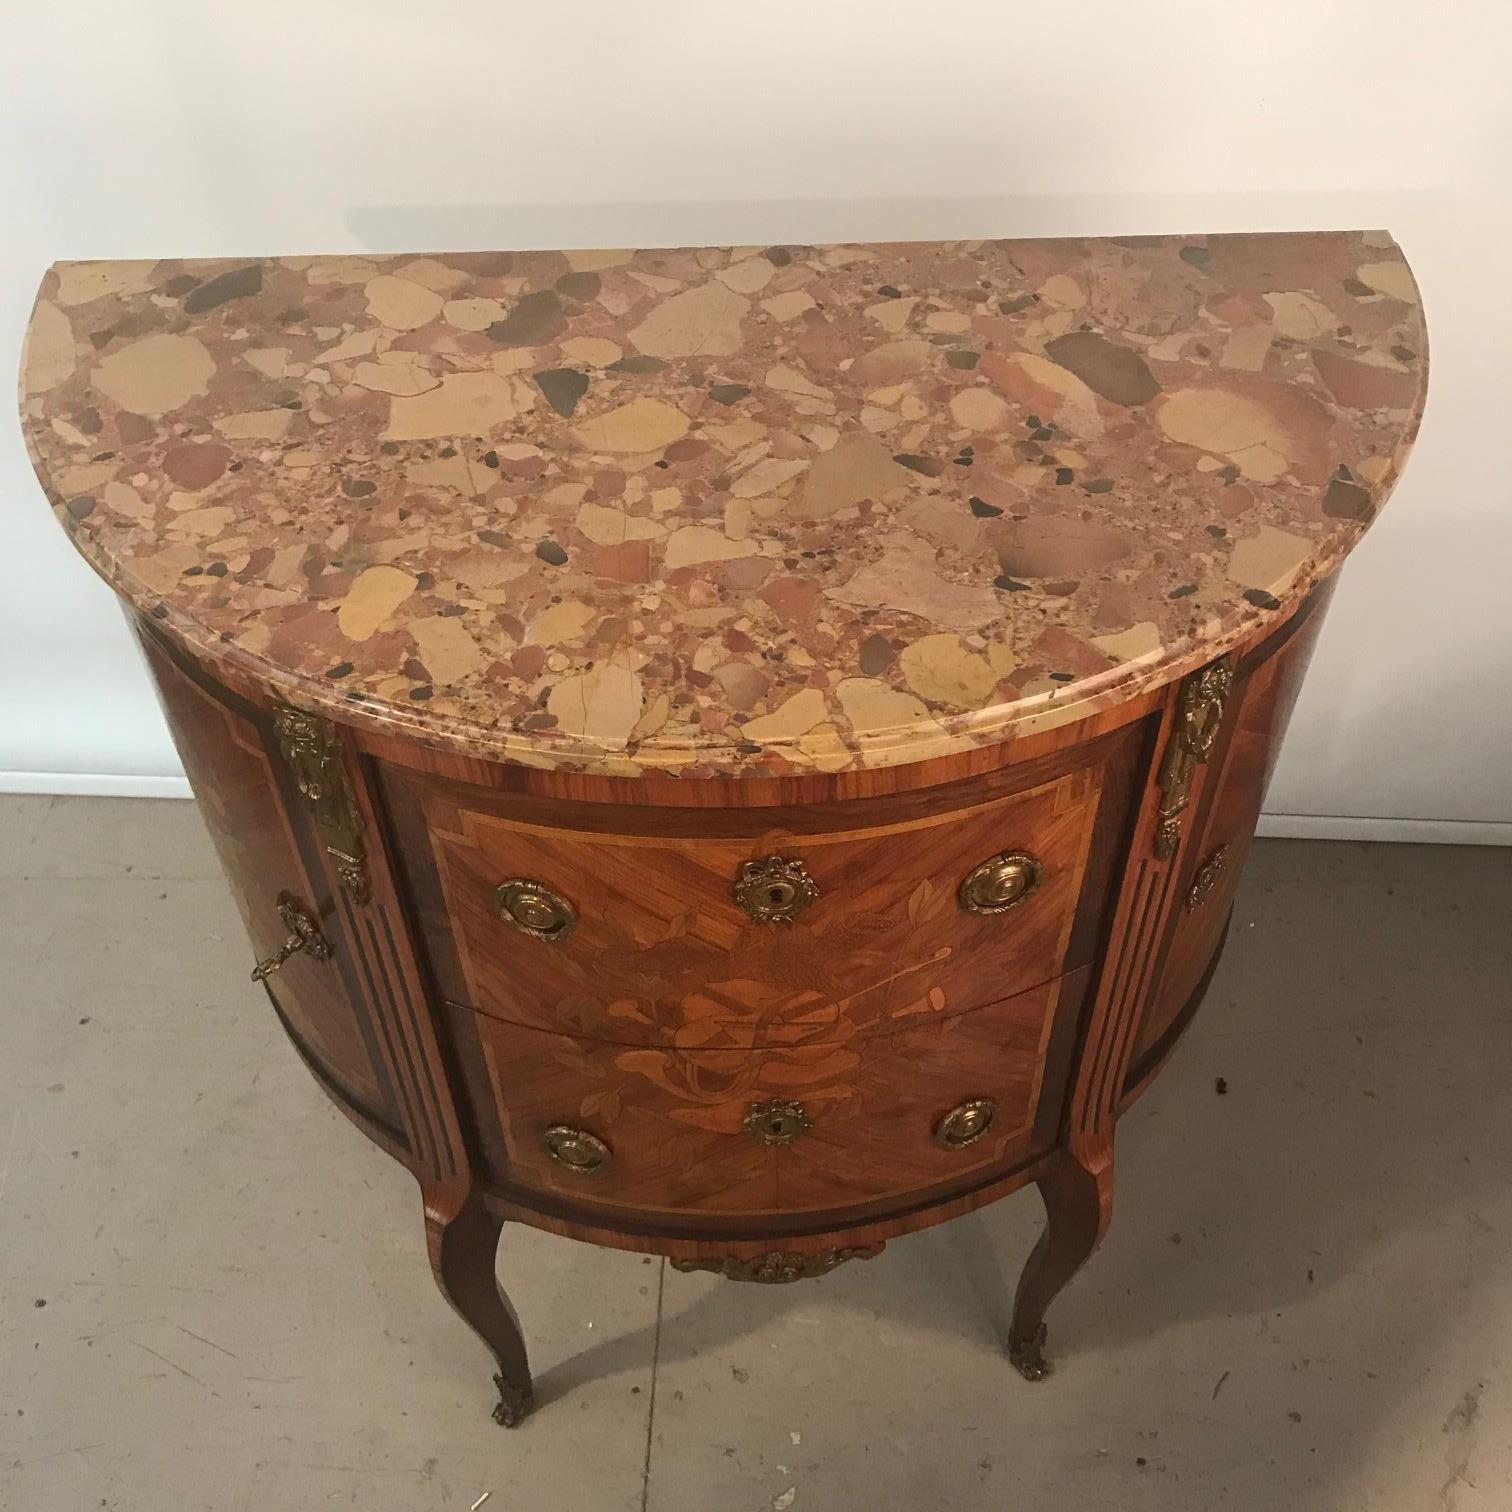 This elegant mahogany commode is a Classic. The two central drawers sans-traverse are flanked by shaped doors enclosing side cupboards. The front is inlaid with a musical trophy, the sides with floral bouquets. Raised on cabriole legs with Scagliola